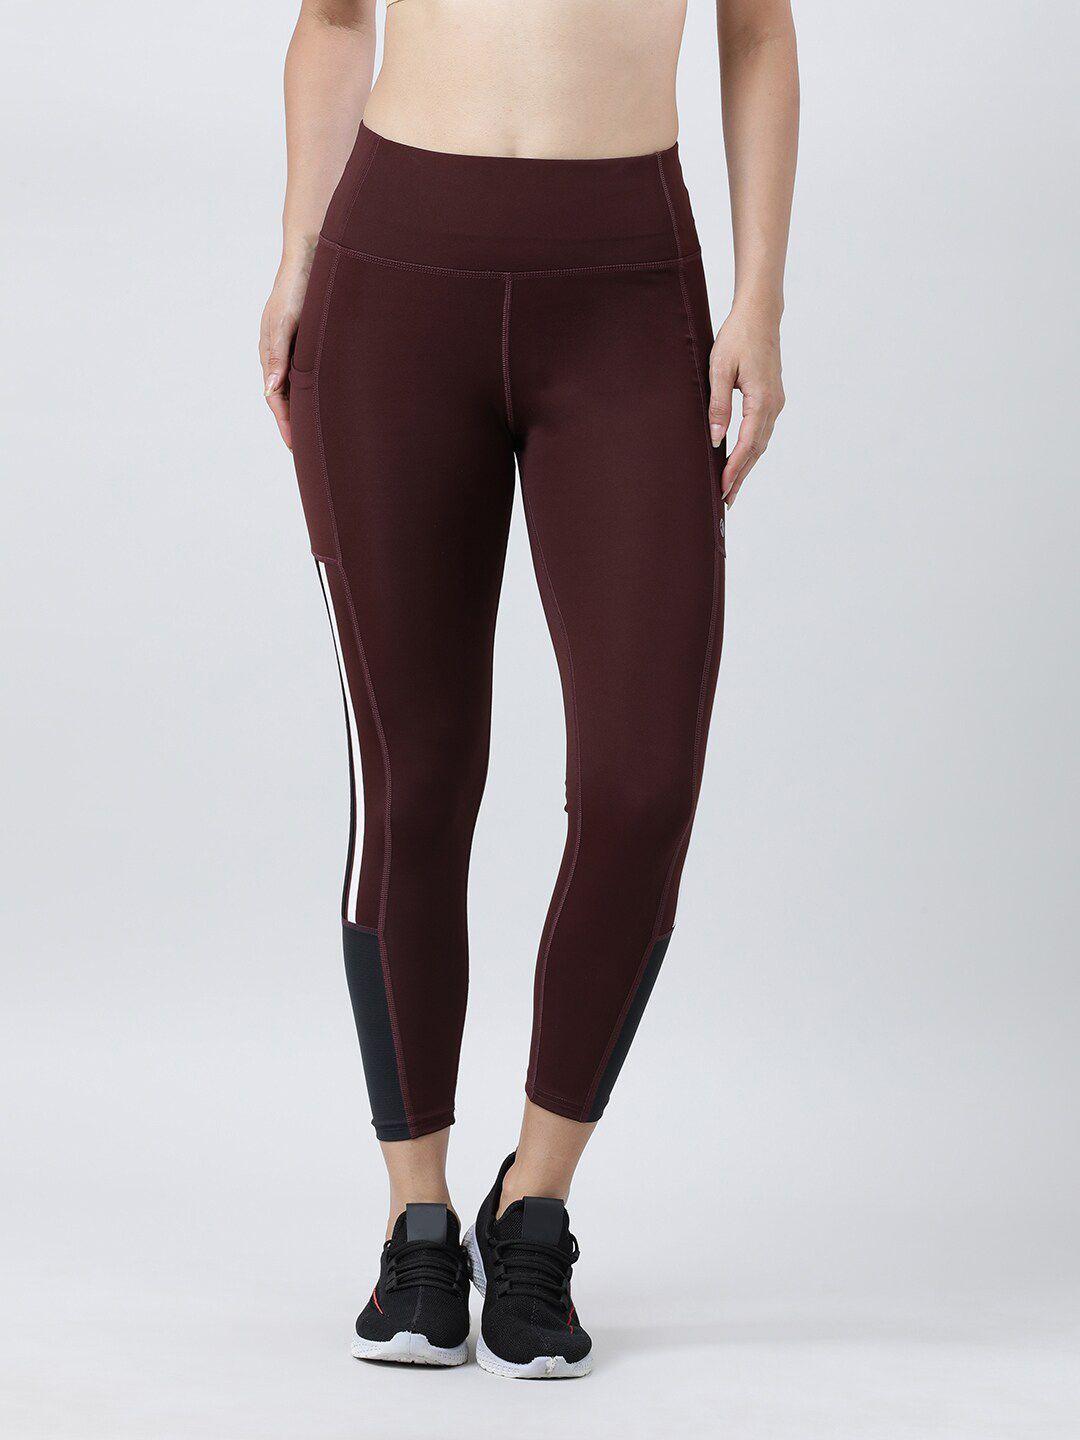 lovable sport women dry fit mid rise slim fit track pants